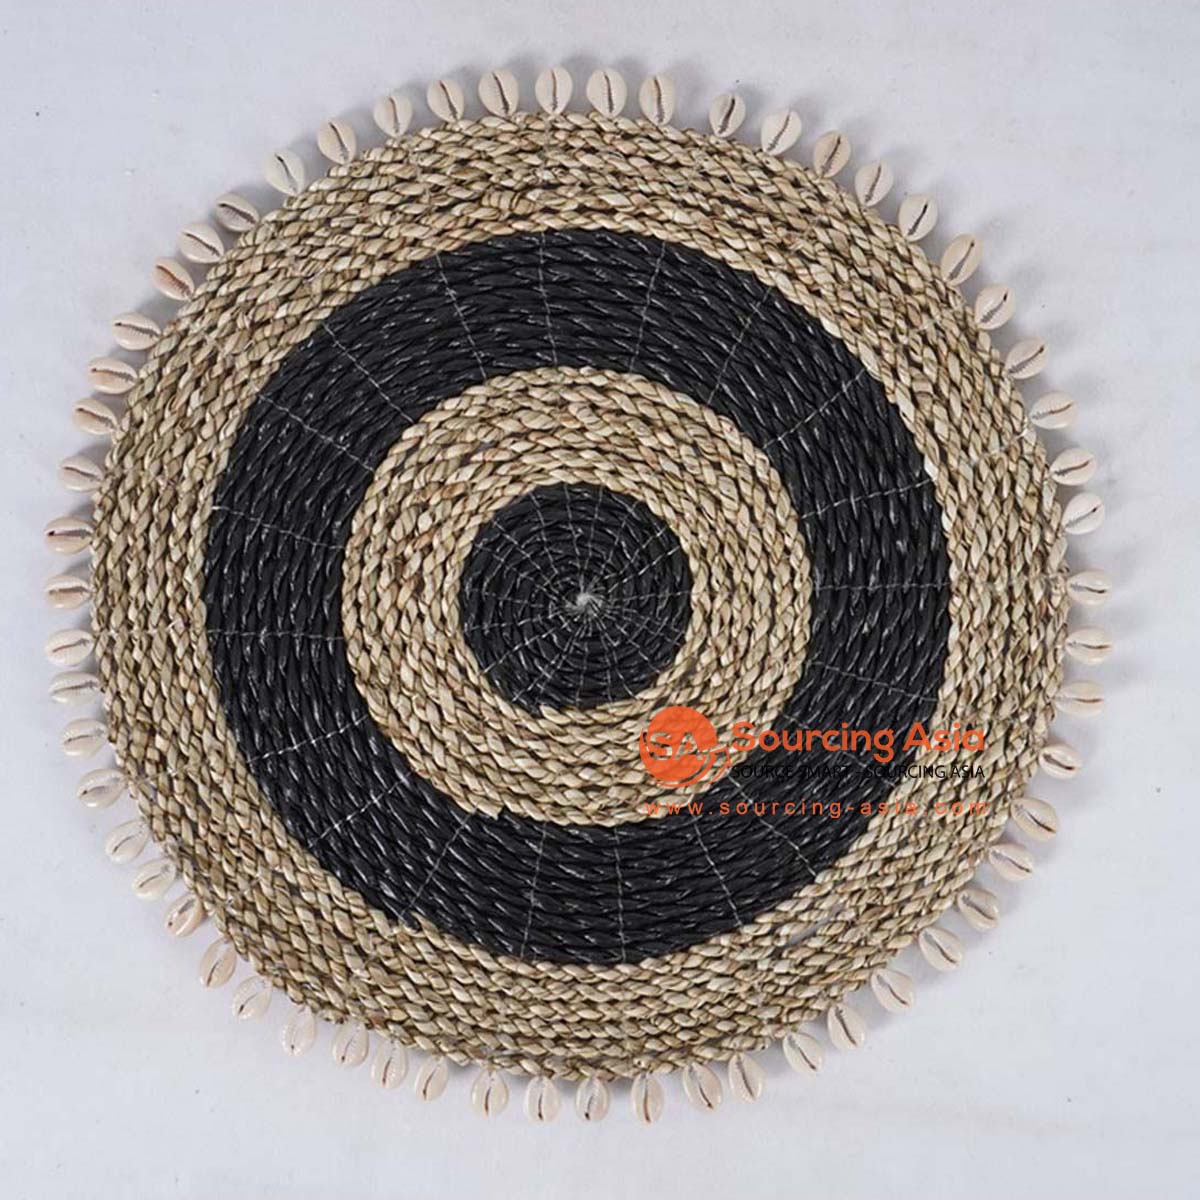 HBSC565-3 NATURAL AND BLACK PANDANUS ROUND PLACEMAT WITH SHELL EDGE